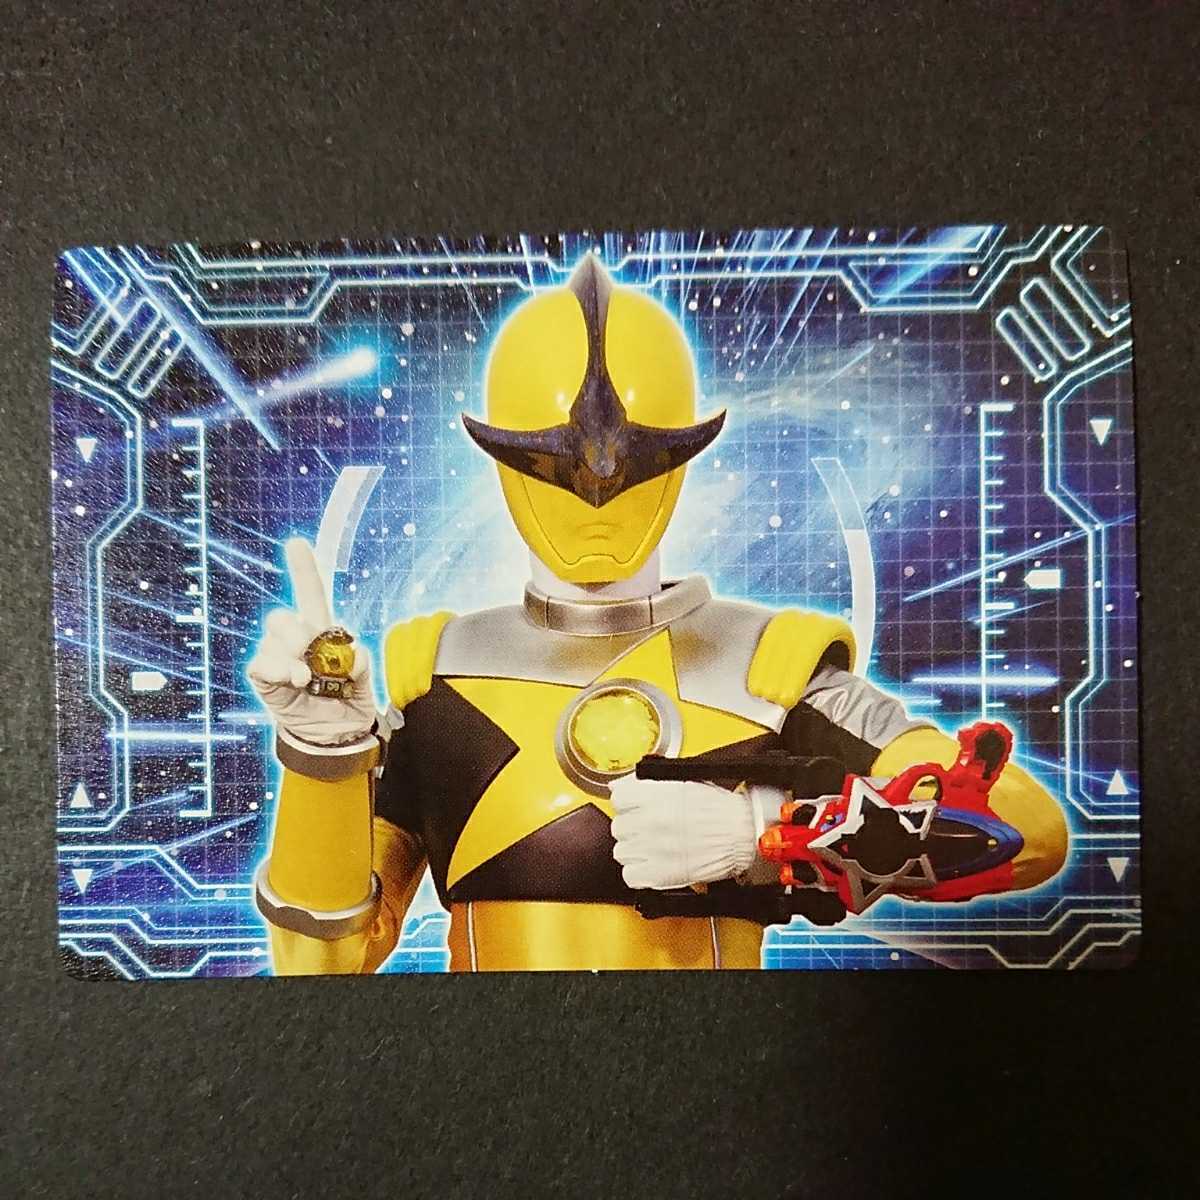  out of print card [36 marlin yellow .sei* The * change!( cosmos Squadron kyuu Ranger card chewing gum )] super Squadron Series. super valuable goods 